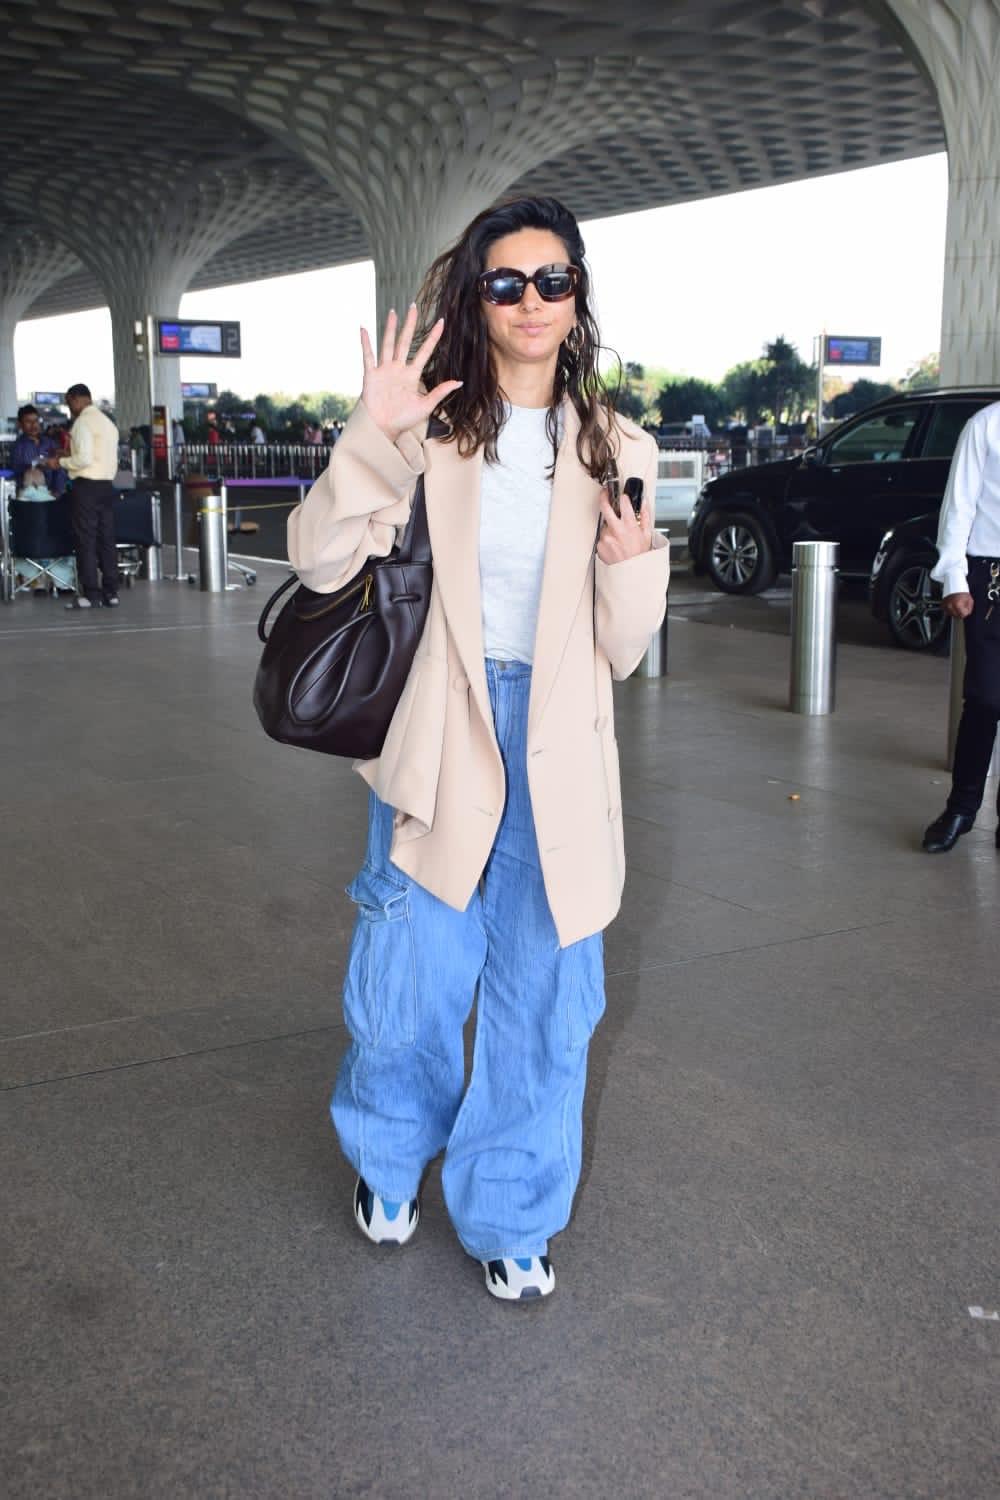 The actress/singer slays every look she dons and that includes her airport look